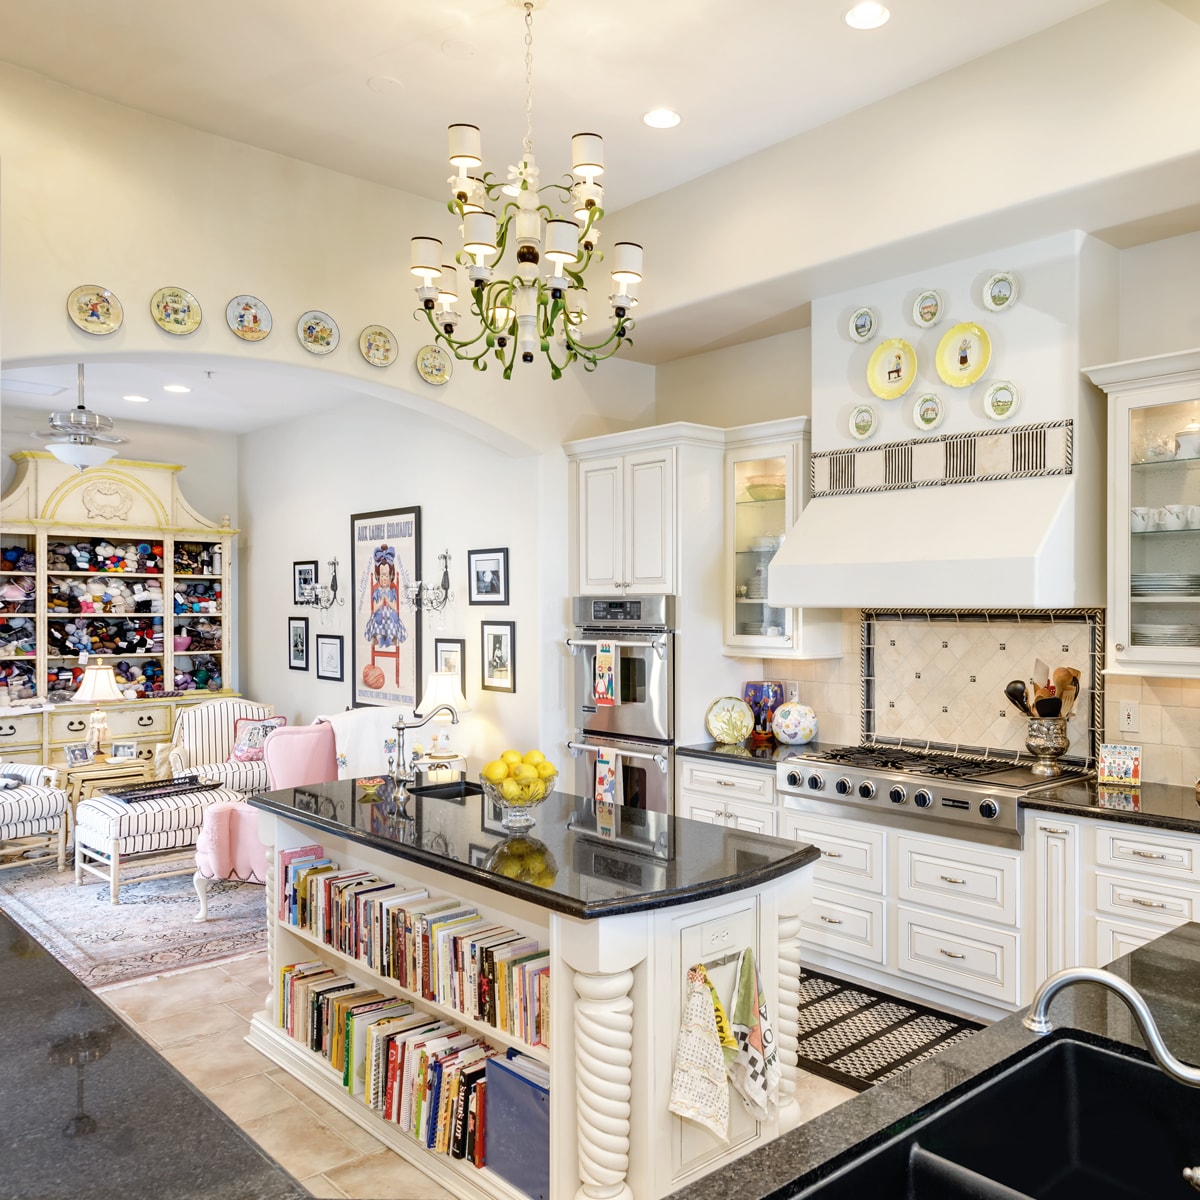 A Traditional designed kitchen with decorative plates, a large chandelier and a kitchen island with a bookshelf.